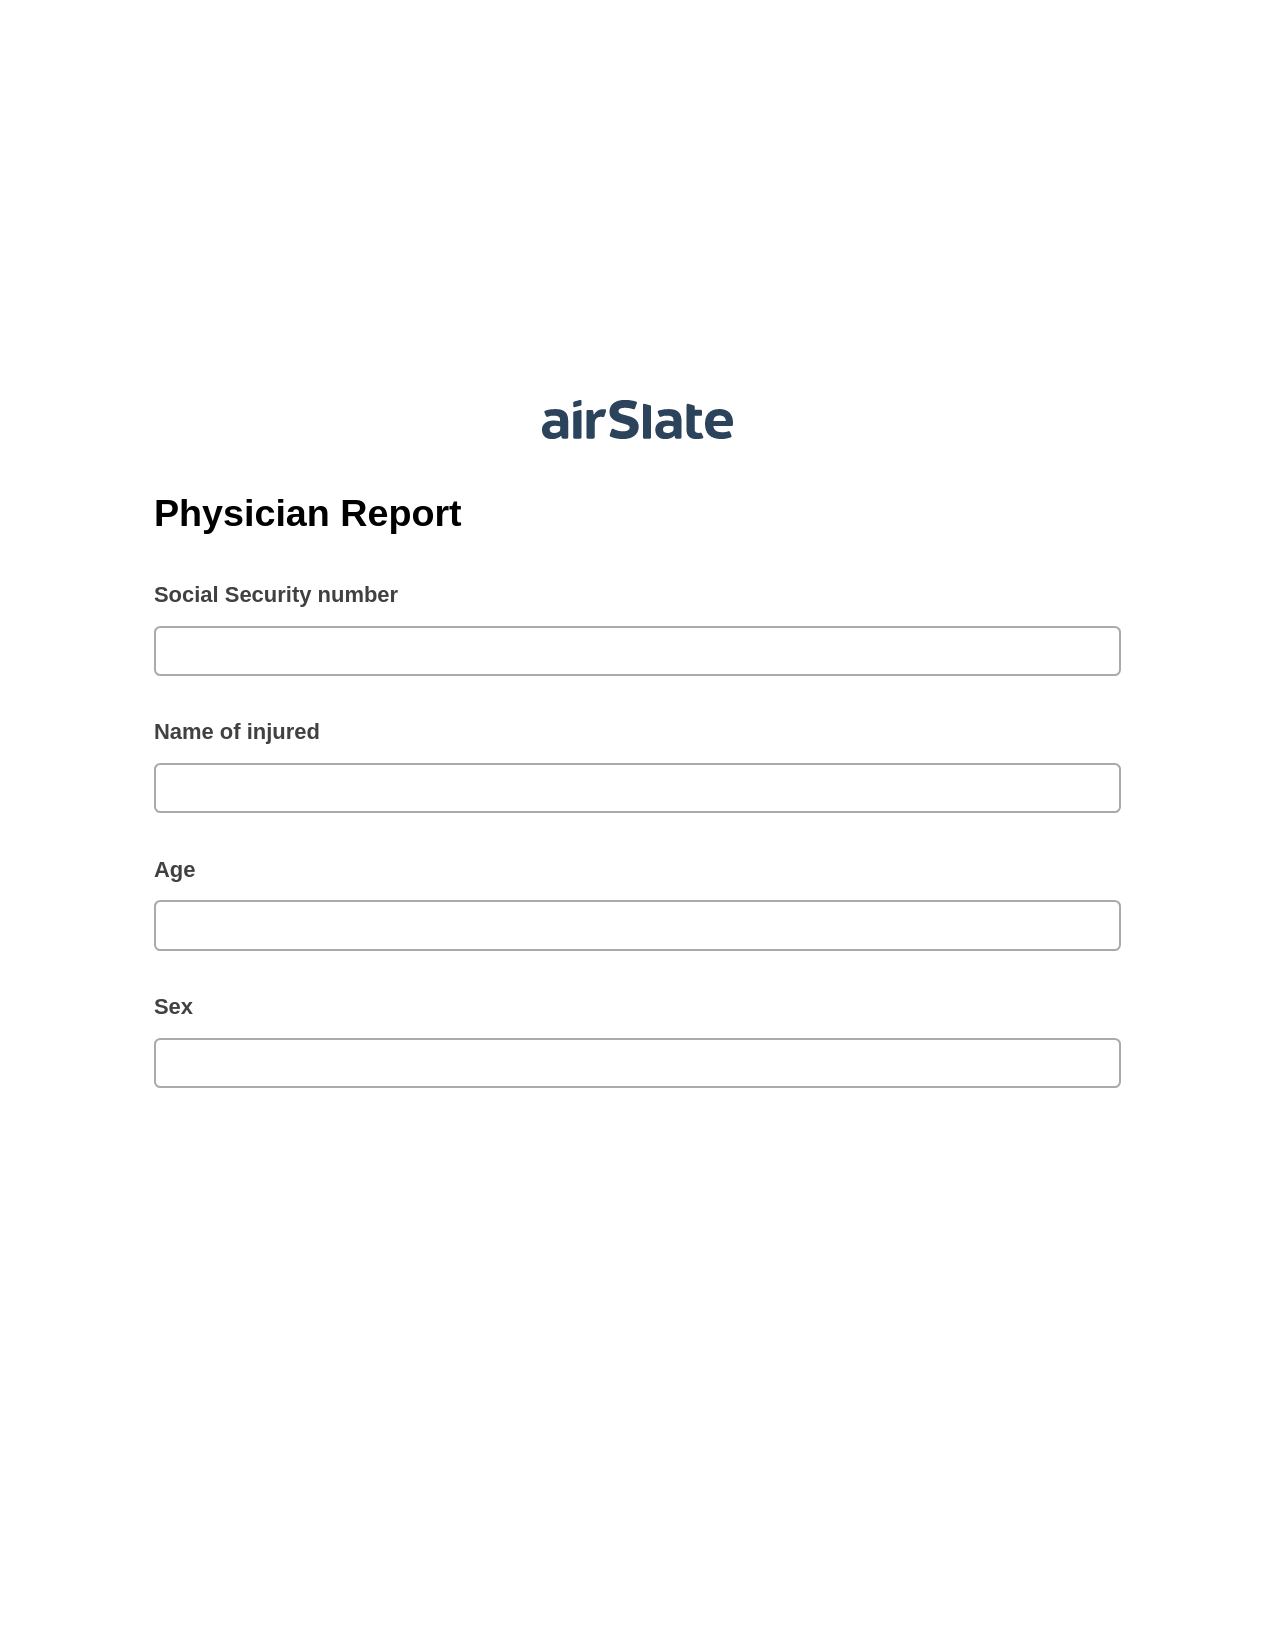 Multirole Physician Report Pre-fill Document Bot, Update NetSuite Record Bot, Archive to Dropbox Bot